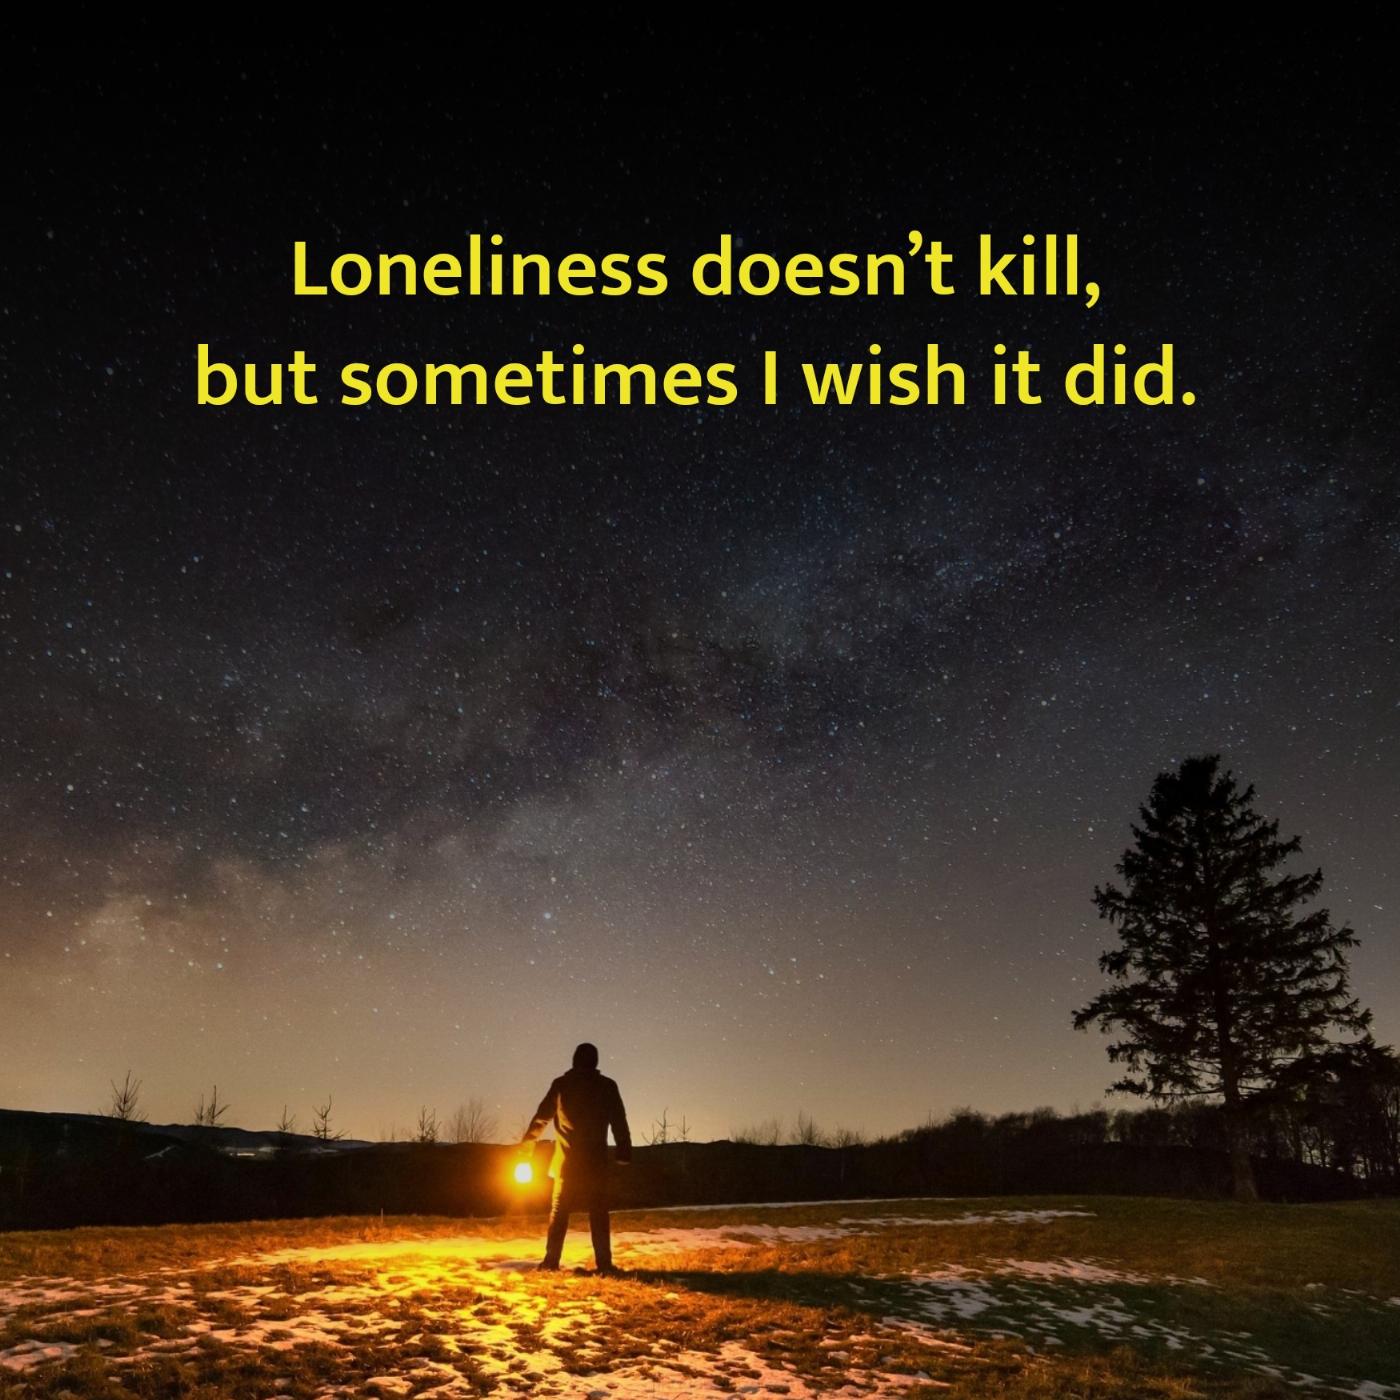 Loneliness doesnt kill but sometimes I wish it did